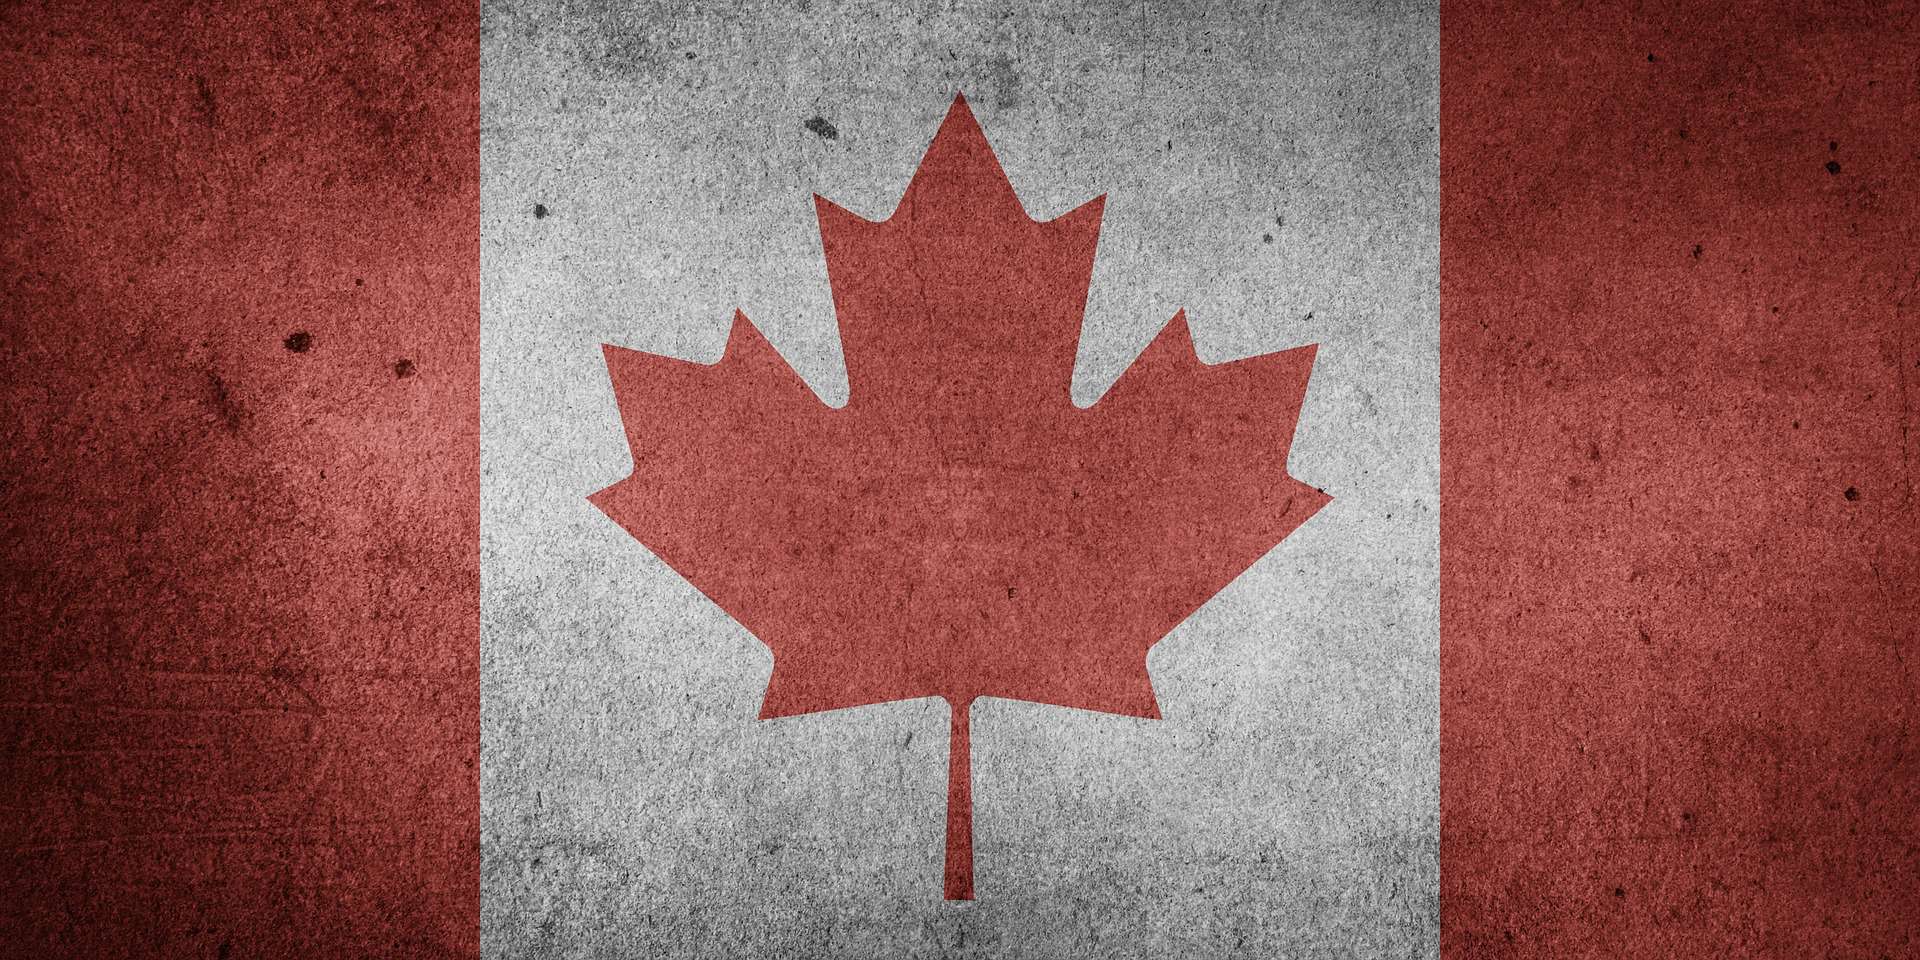 Illustration of the Canadian flag.